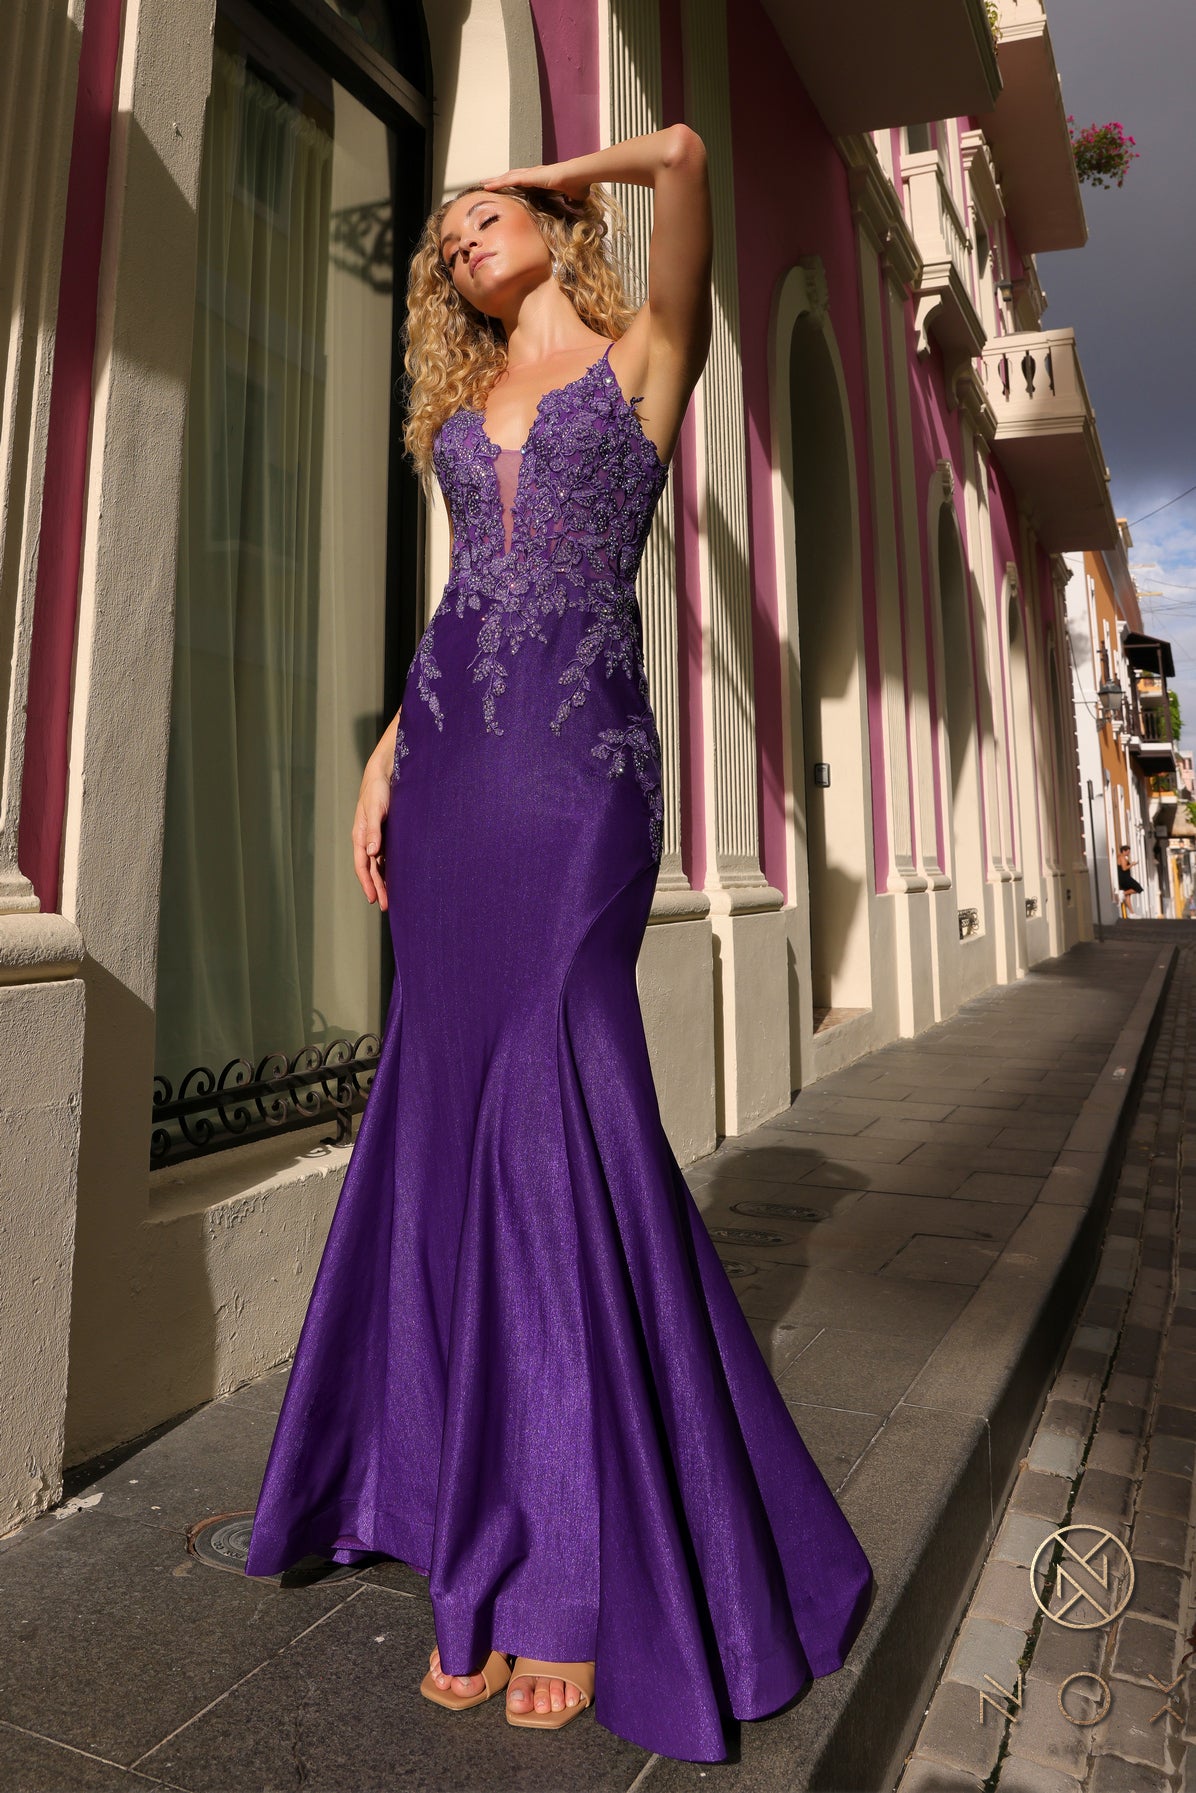 Nox Anabel -G1364 Lace Embroidered Bodice Sheath Dress